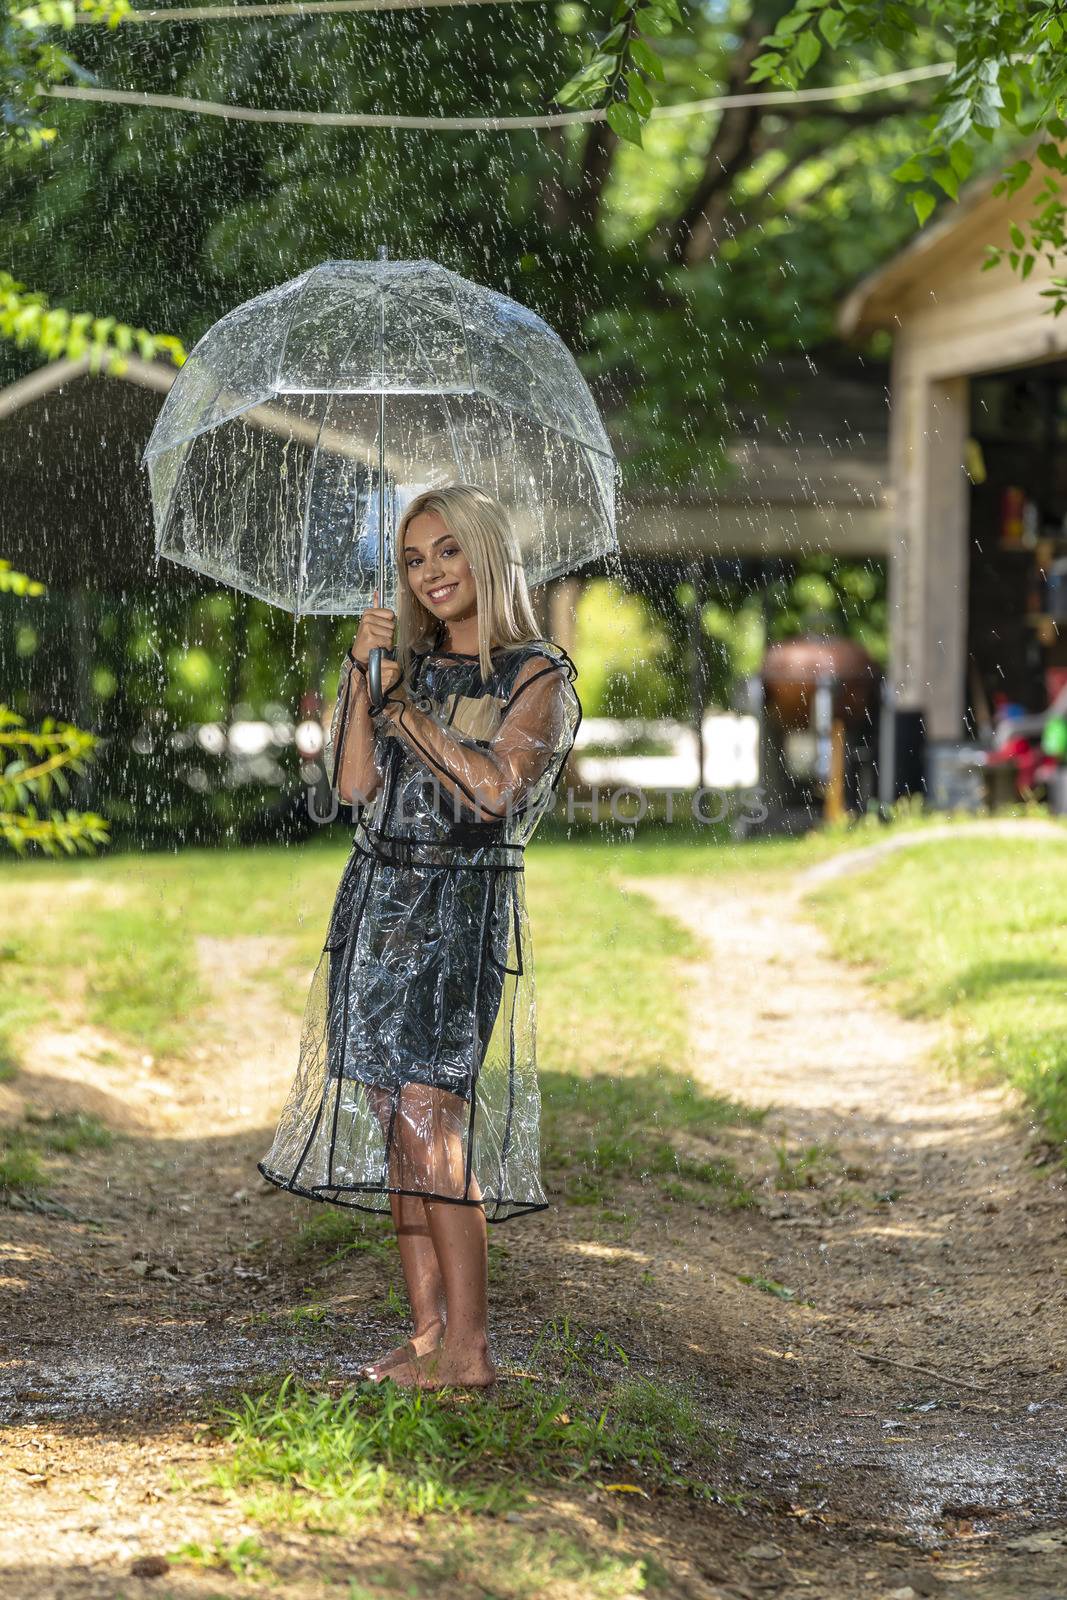 A Young Lovely Blonde Model Poses Outdoors As She Gets Rained On While Enjoying A Summers Day by actionsports